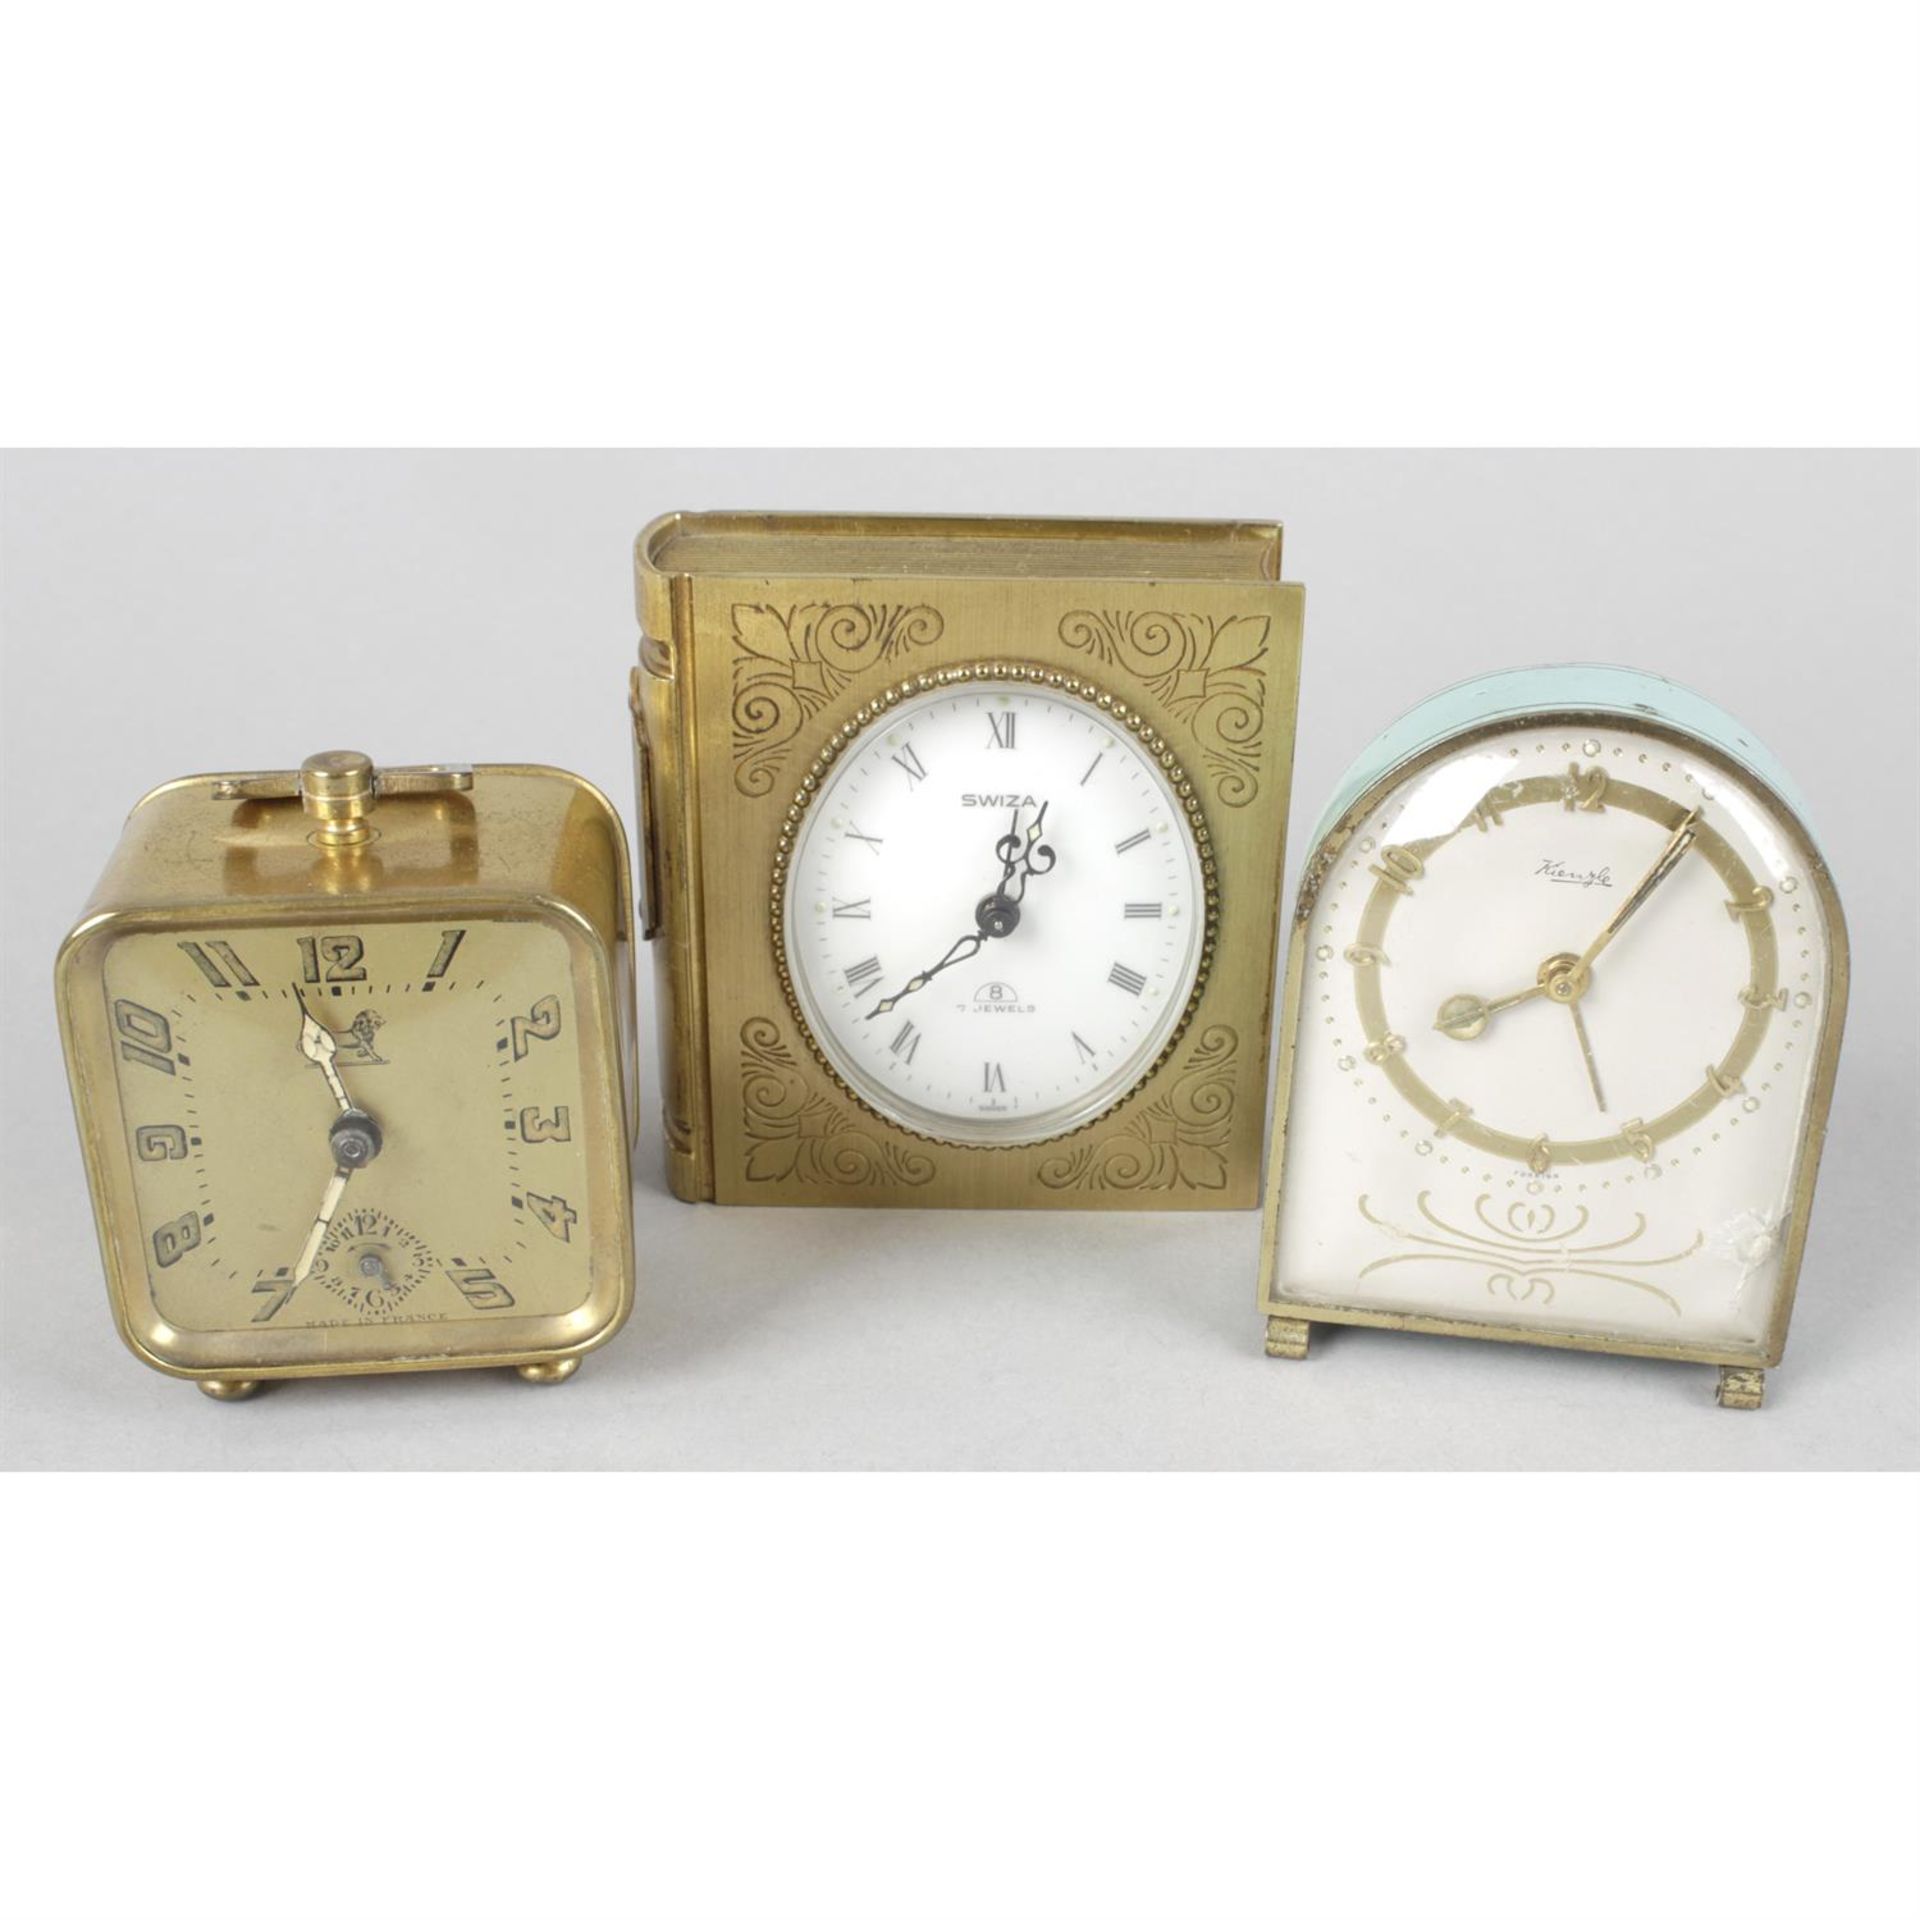 A selection of travel and carriage clocks. - Image 2 of 3